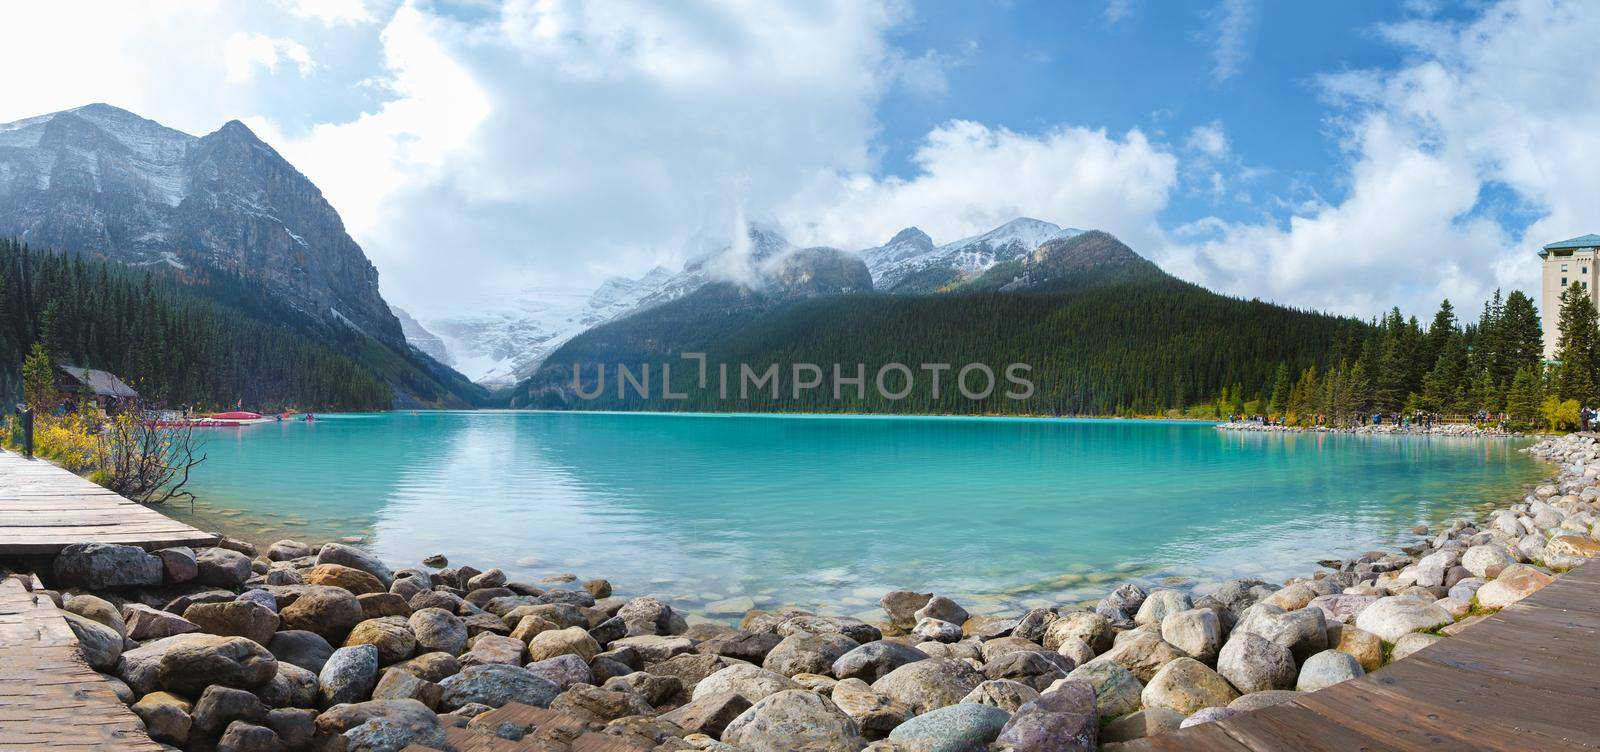 Lake Louise Banff national park, a lake in the Canadian Rocky Mountains.